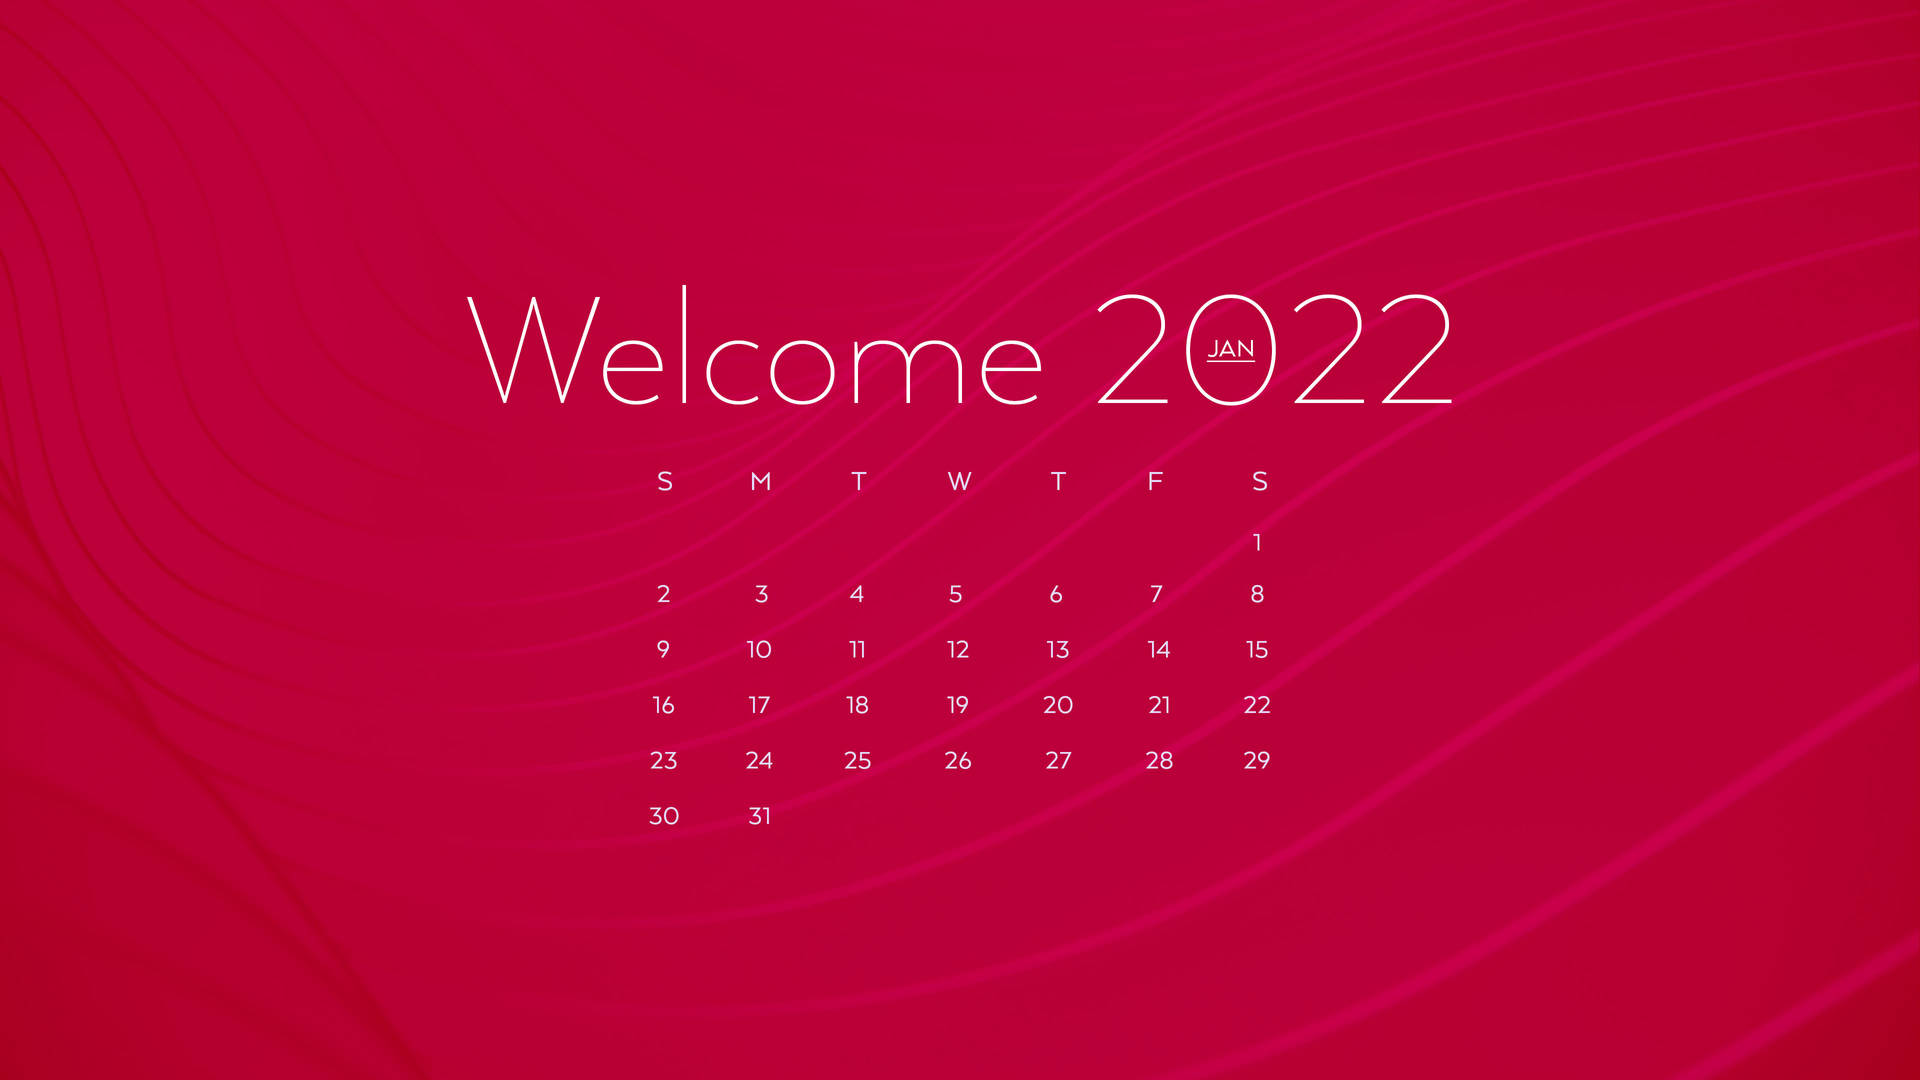 Welcome January 2022 Red Calendar Picture